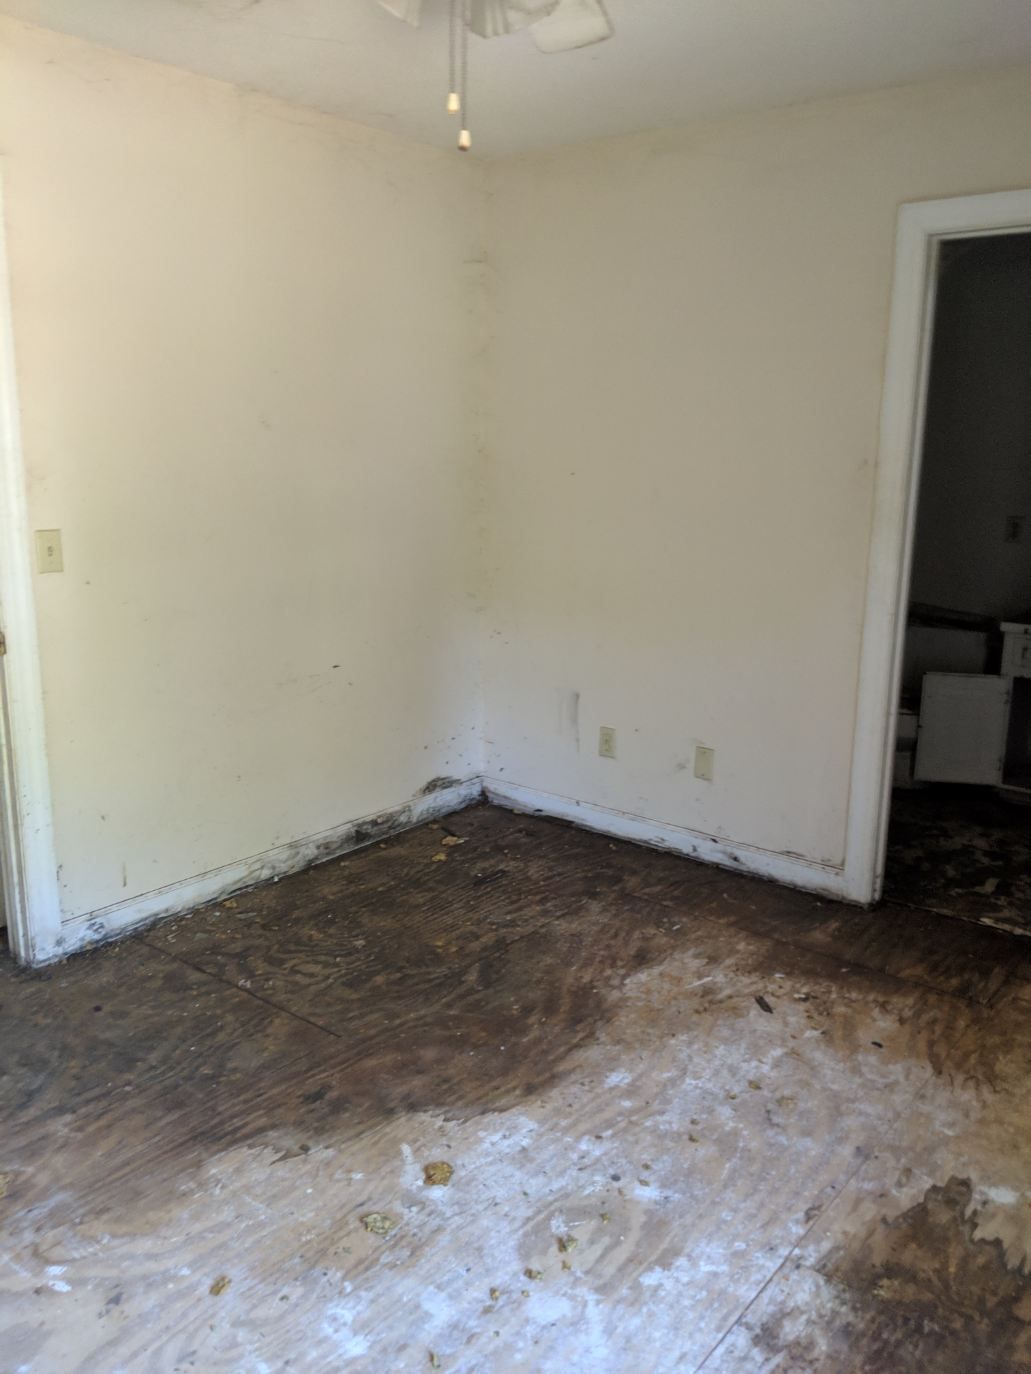 an empty room with a muddy floor and white walls